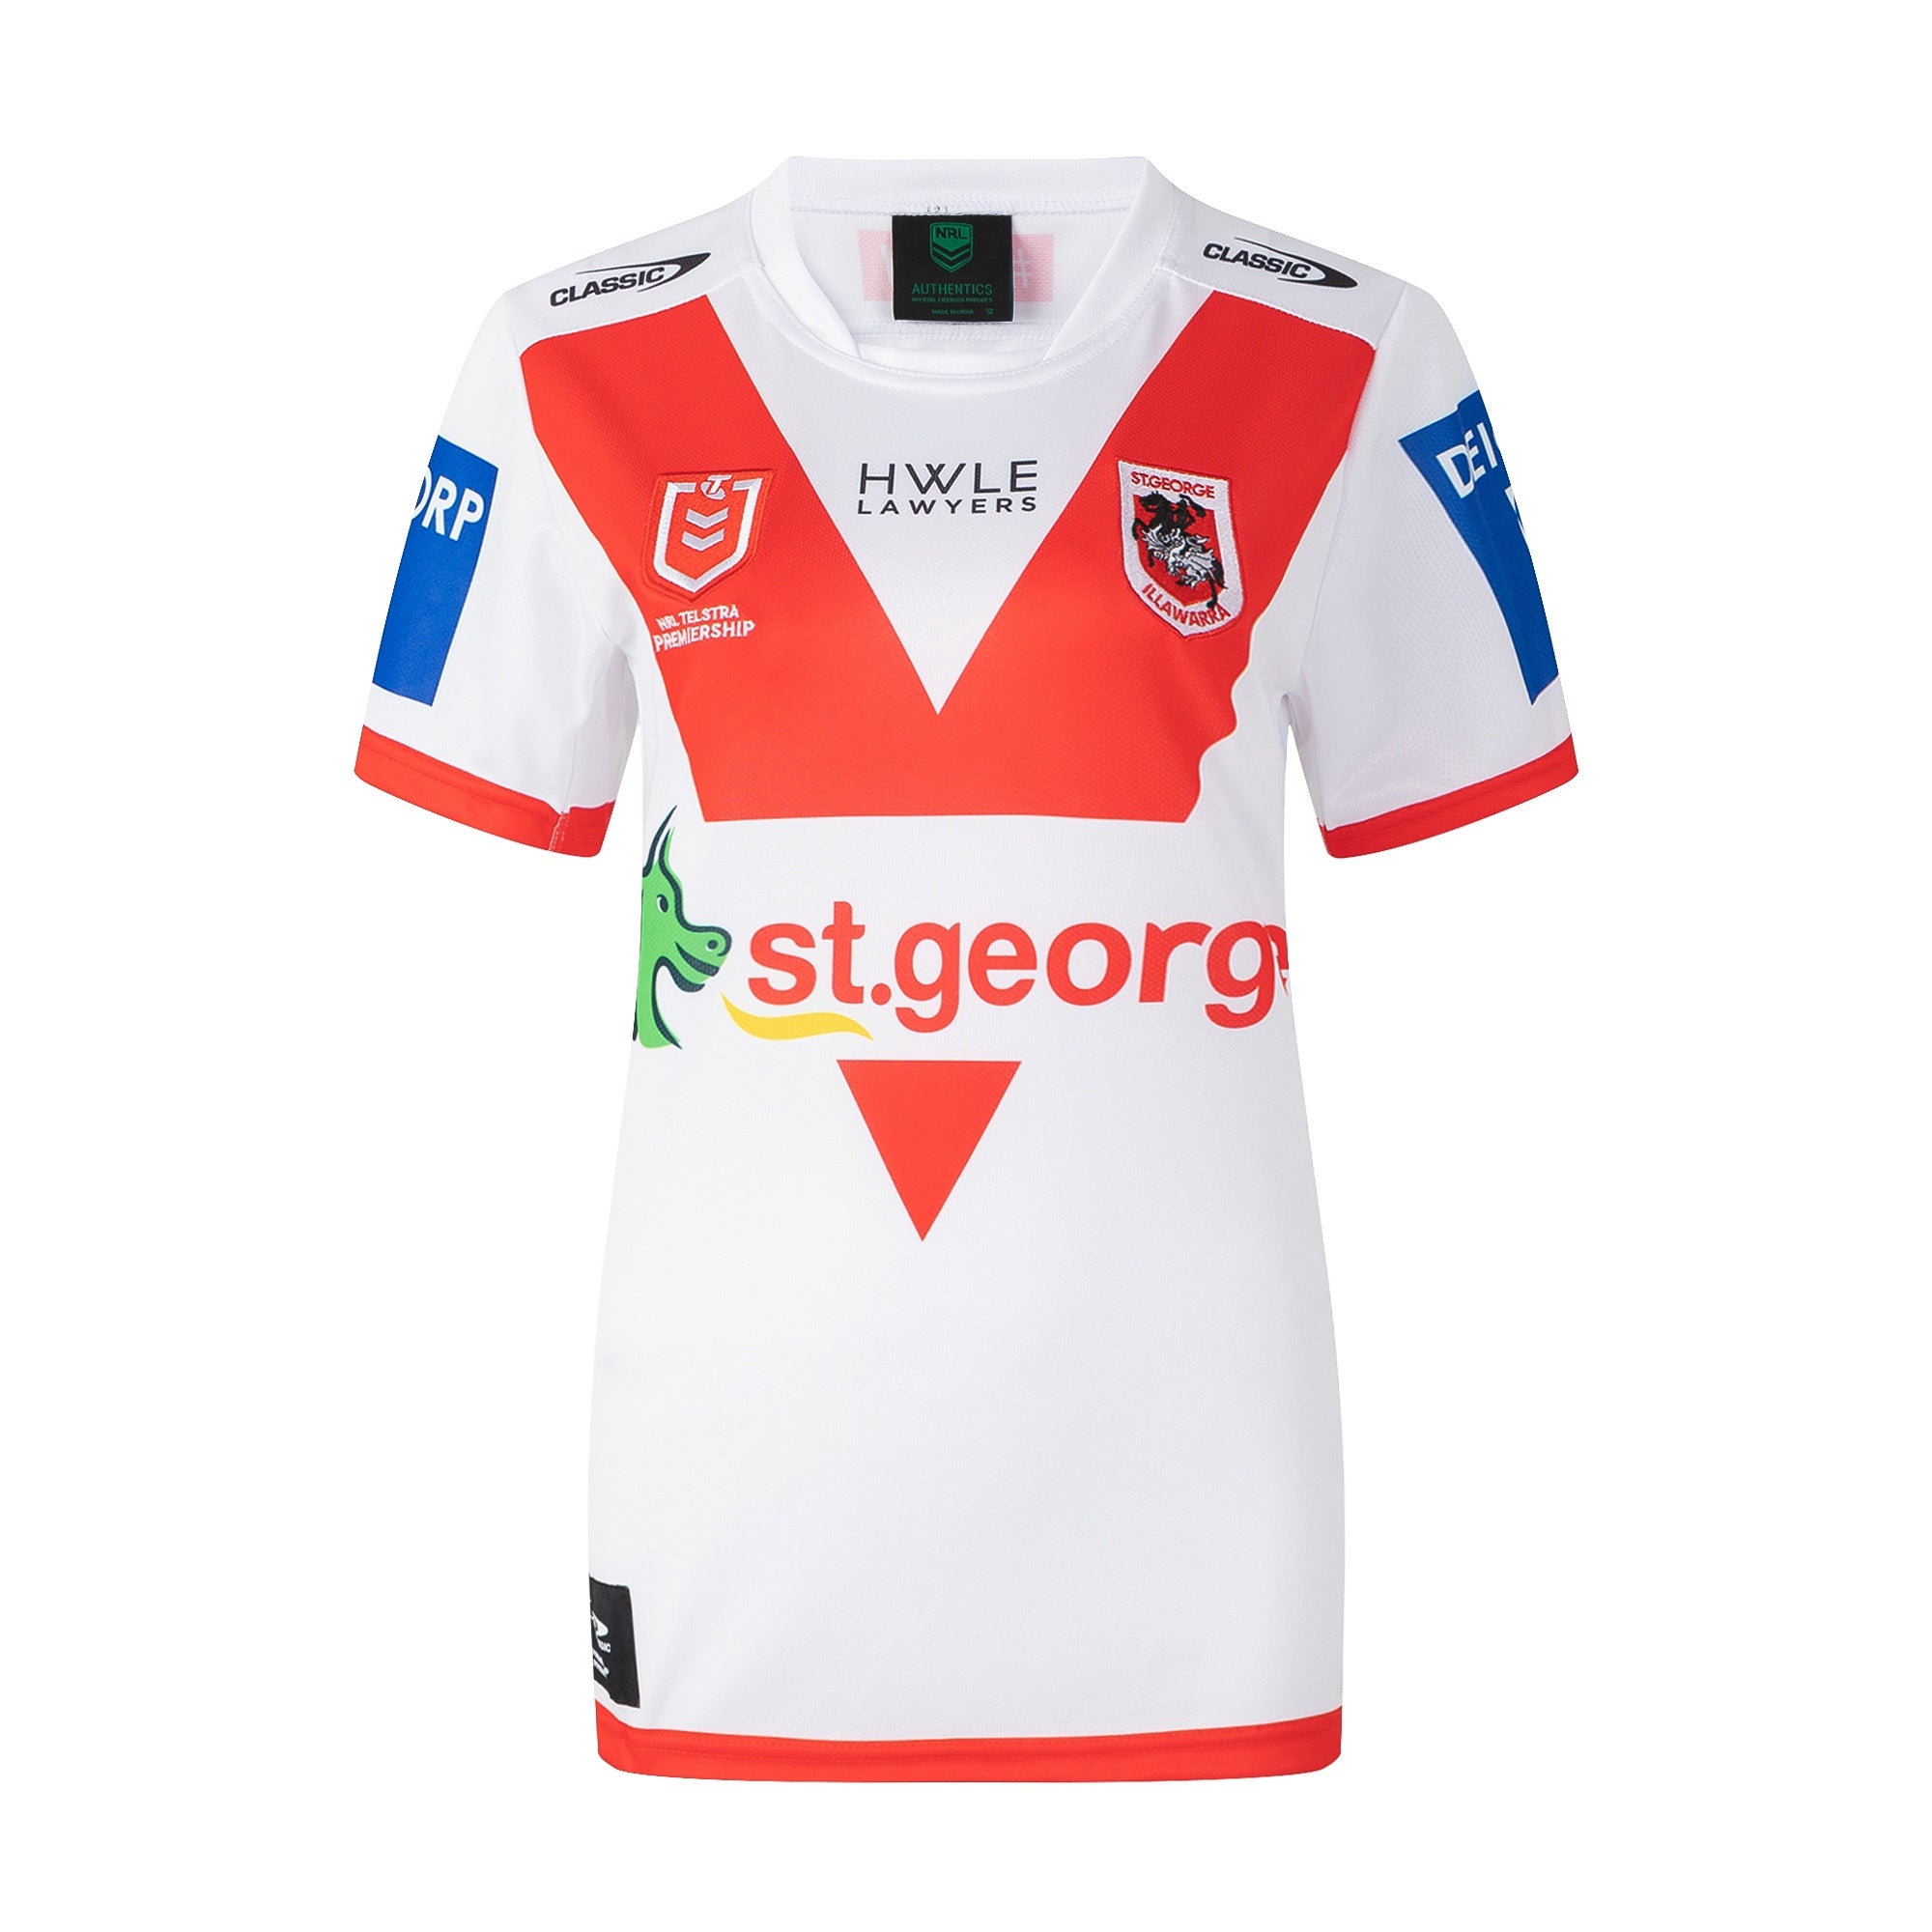 Dragons Home Jersey22 - The Rugby Shop Darwin